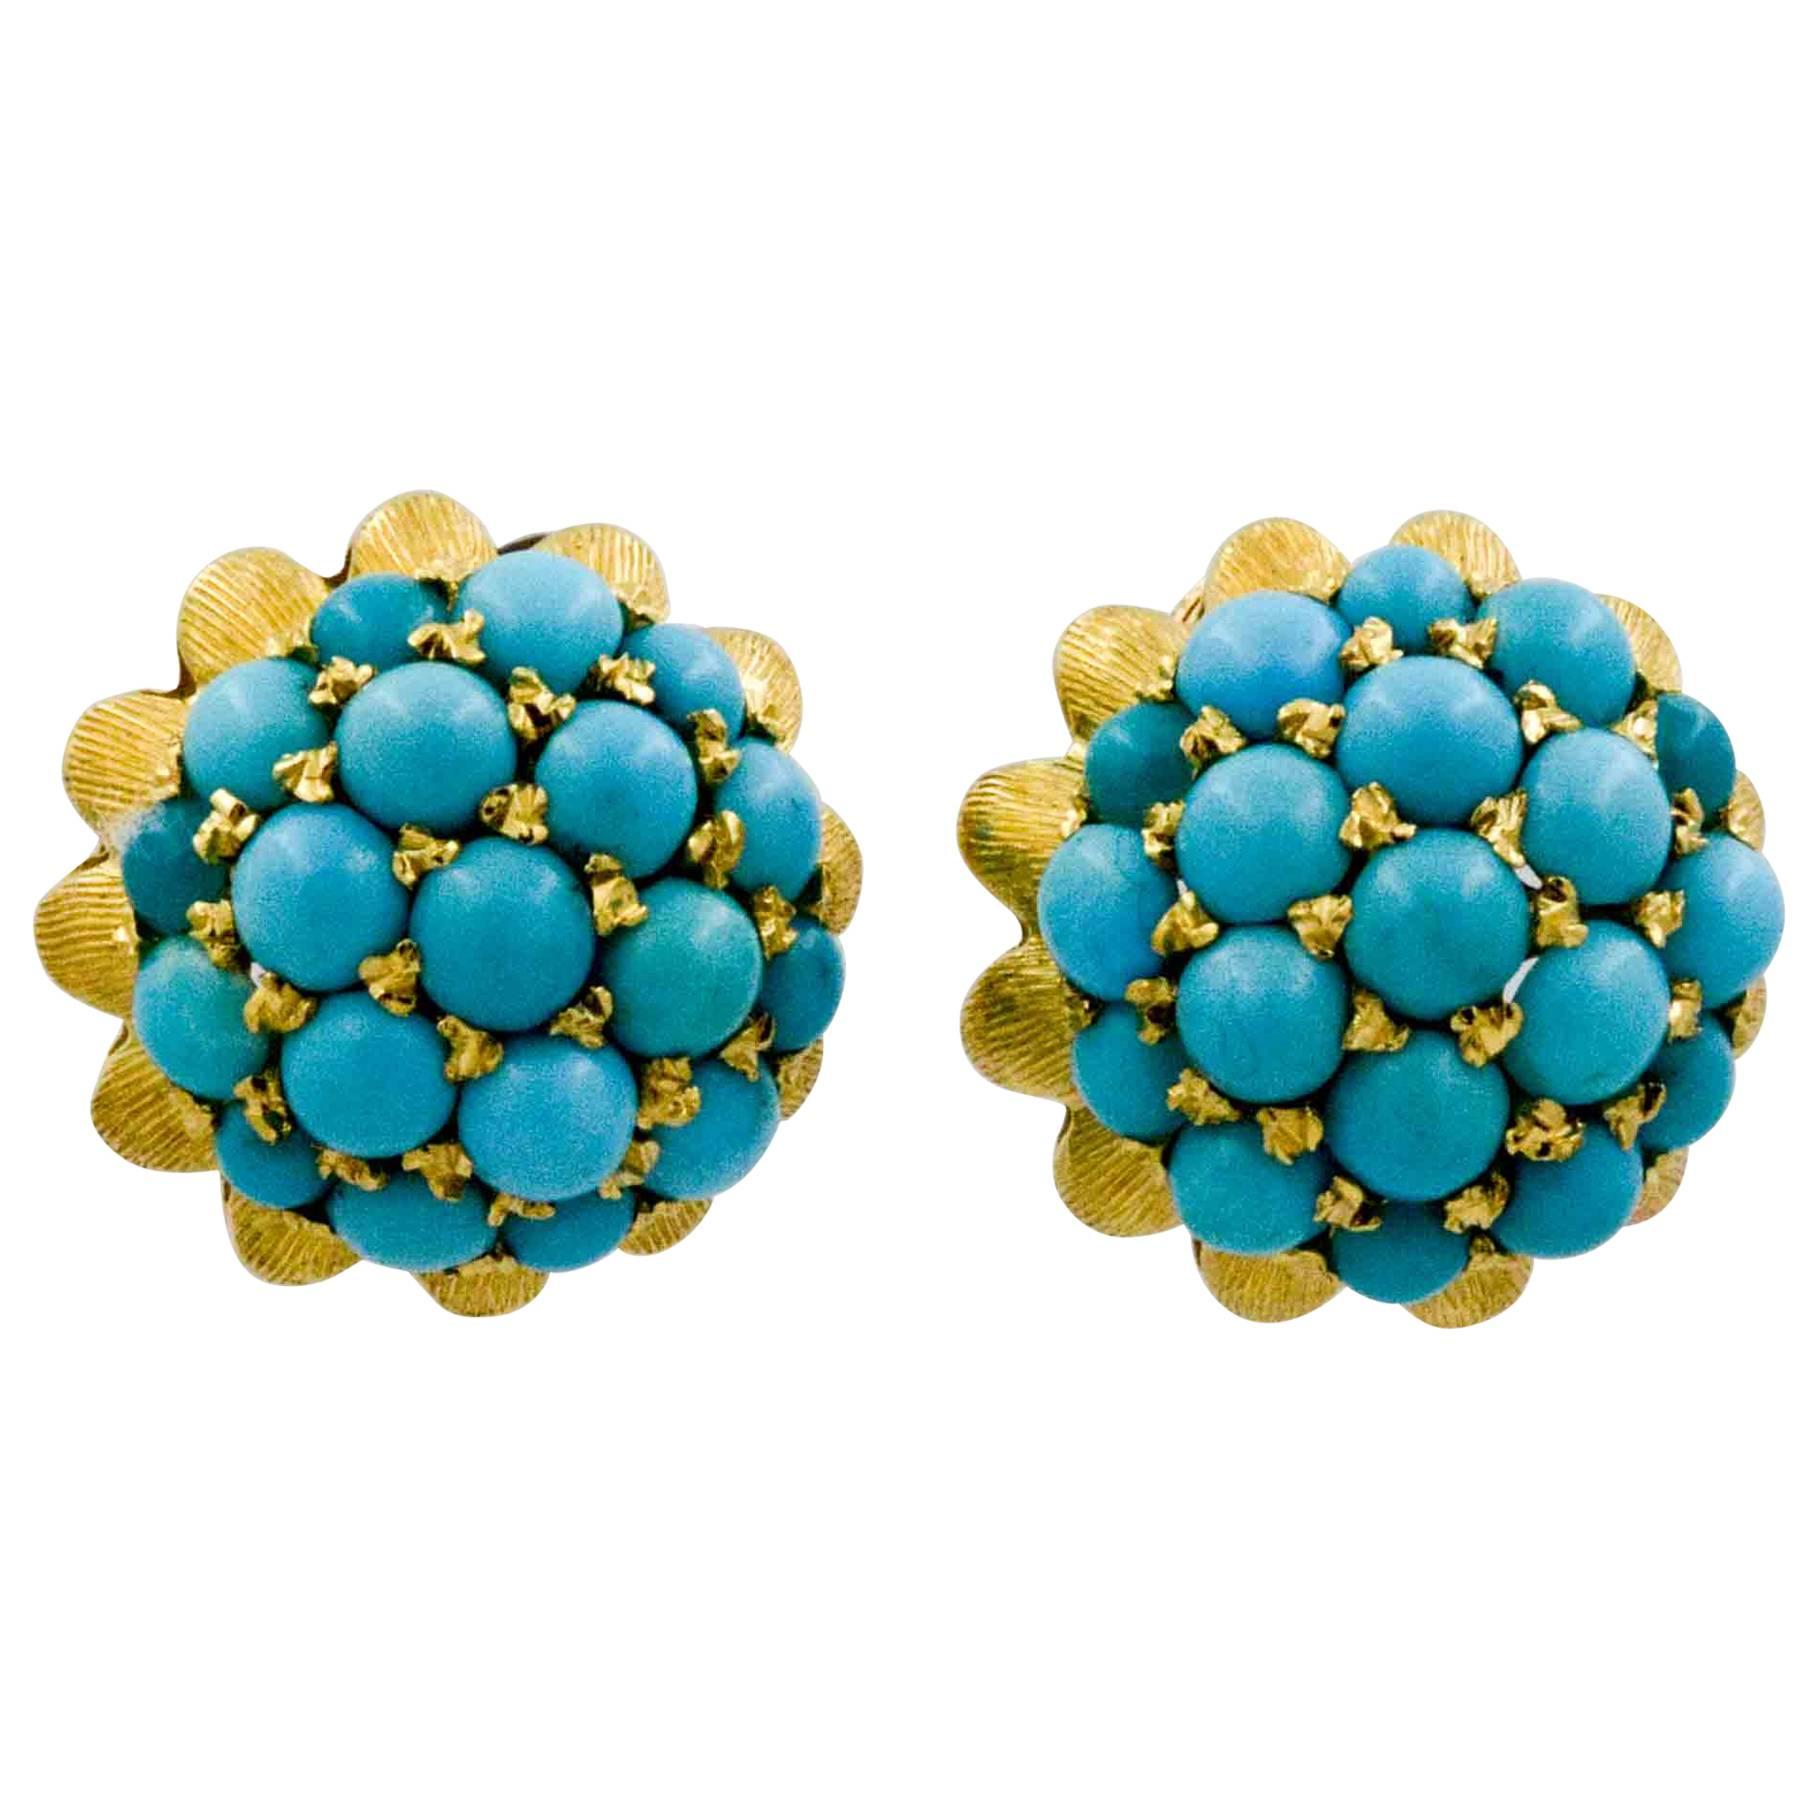 If you love turquoise; you will love these Etruscan Revival style cabochon cut turquoise stud earrings. Shimmering 18 karat gold highlights peek through 32 round cabochon cut turquoise. These beautiful earrings are domed and have post back studs.